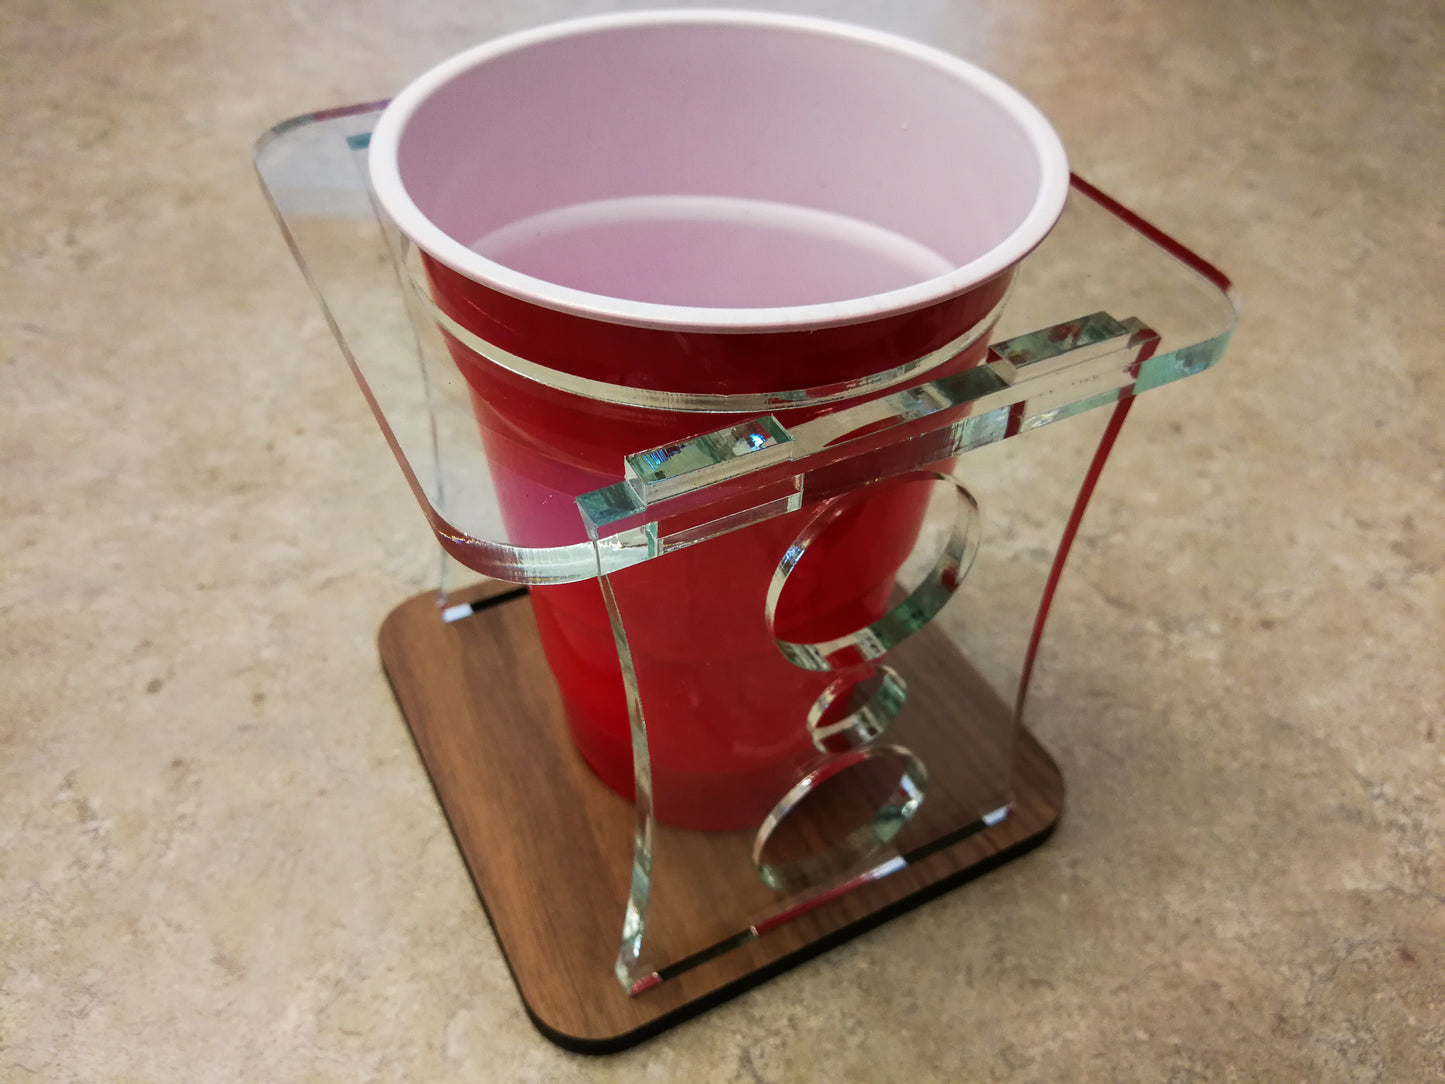 Party Cup Holder